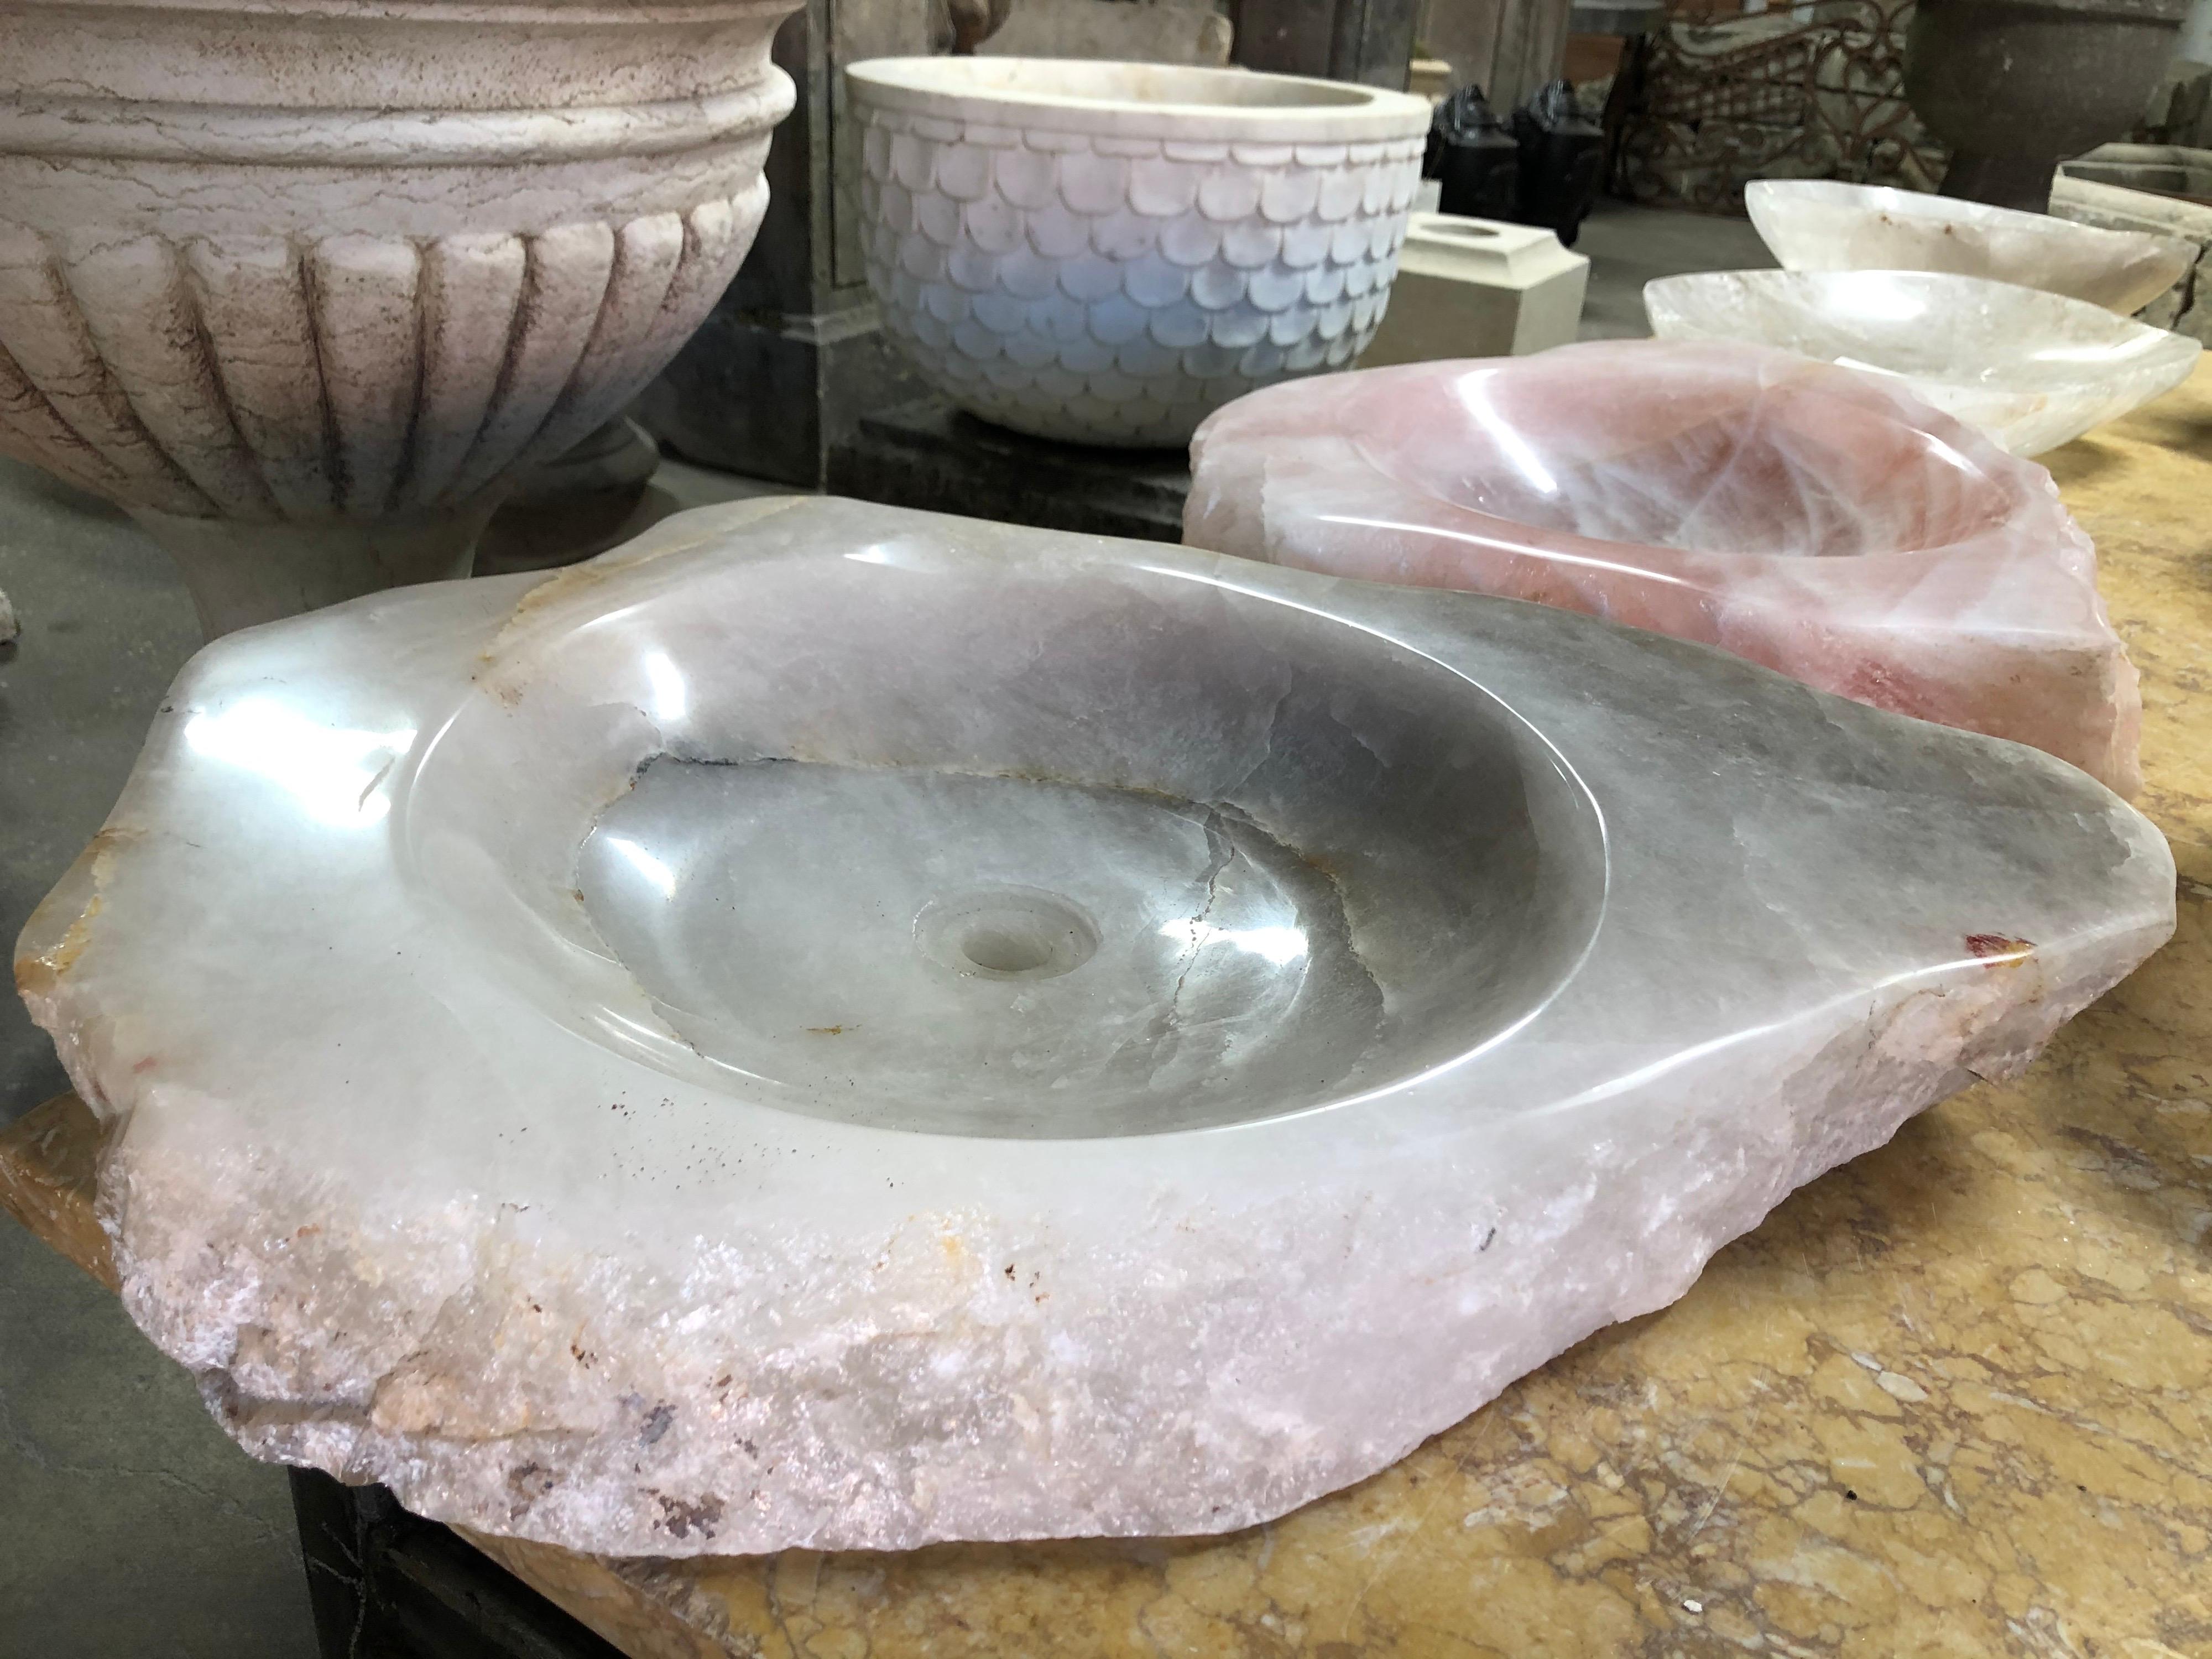 Hand carved rock crystal sink from South America.

